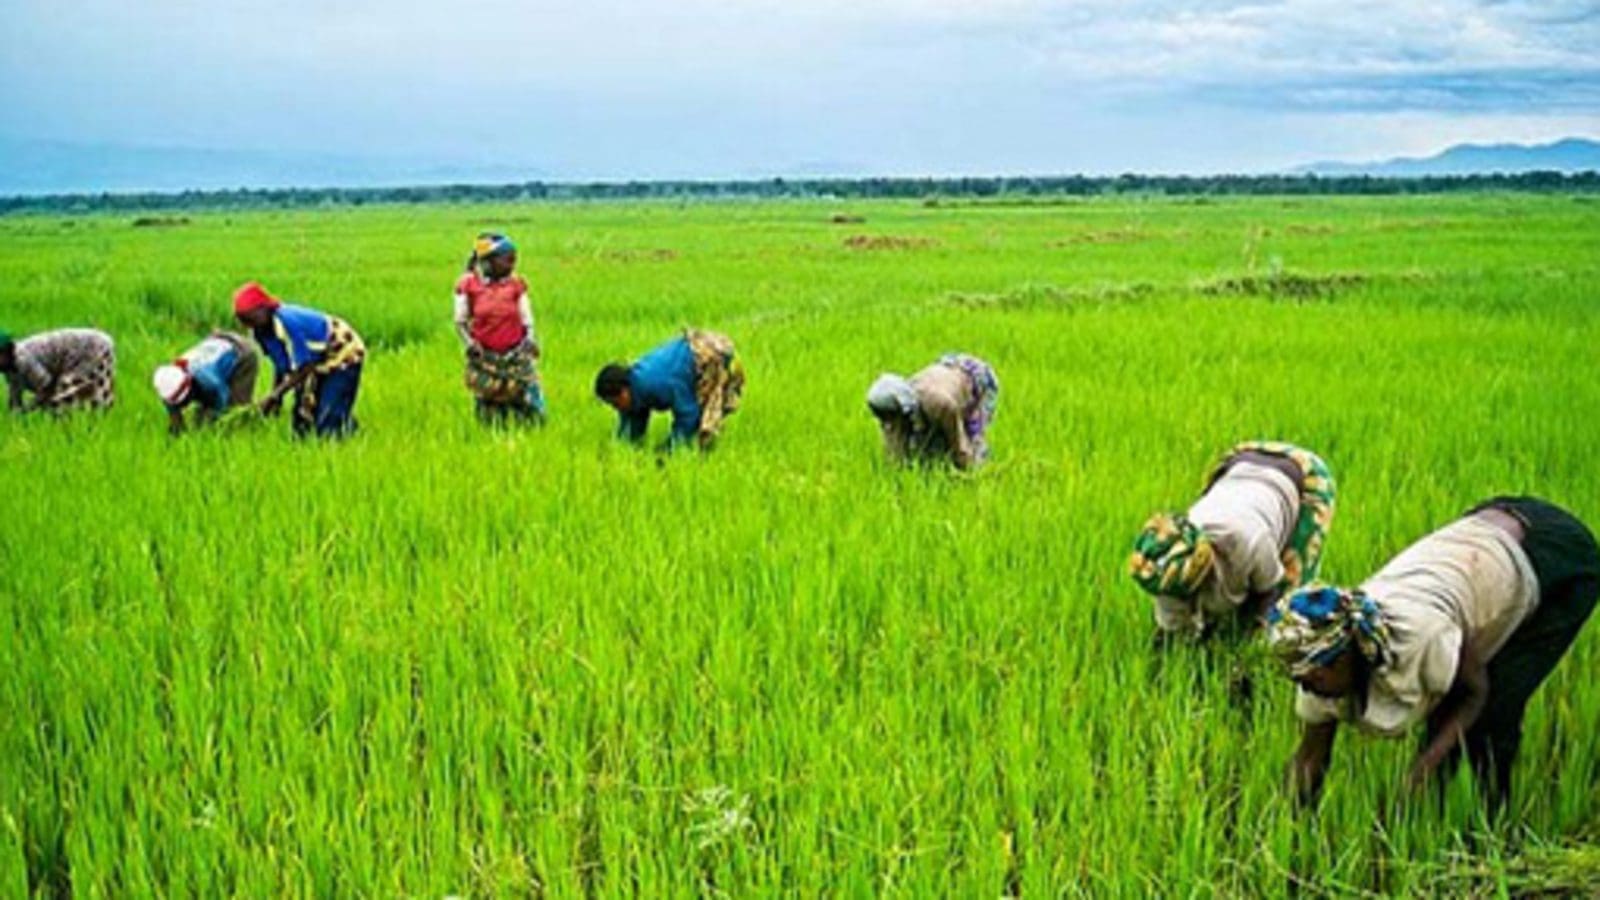 Kenya to increase rice acreage by 100,000 in 5 years as plans to transition to irrigated agriculture intensifies